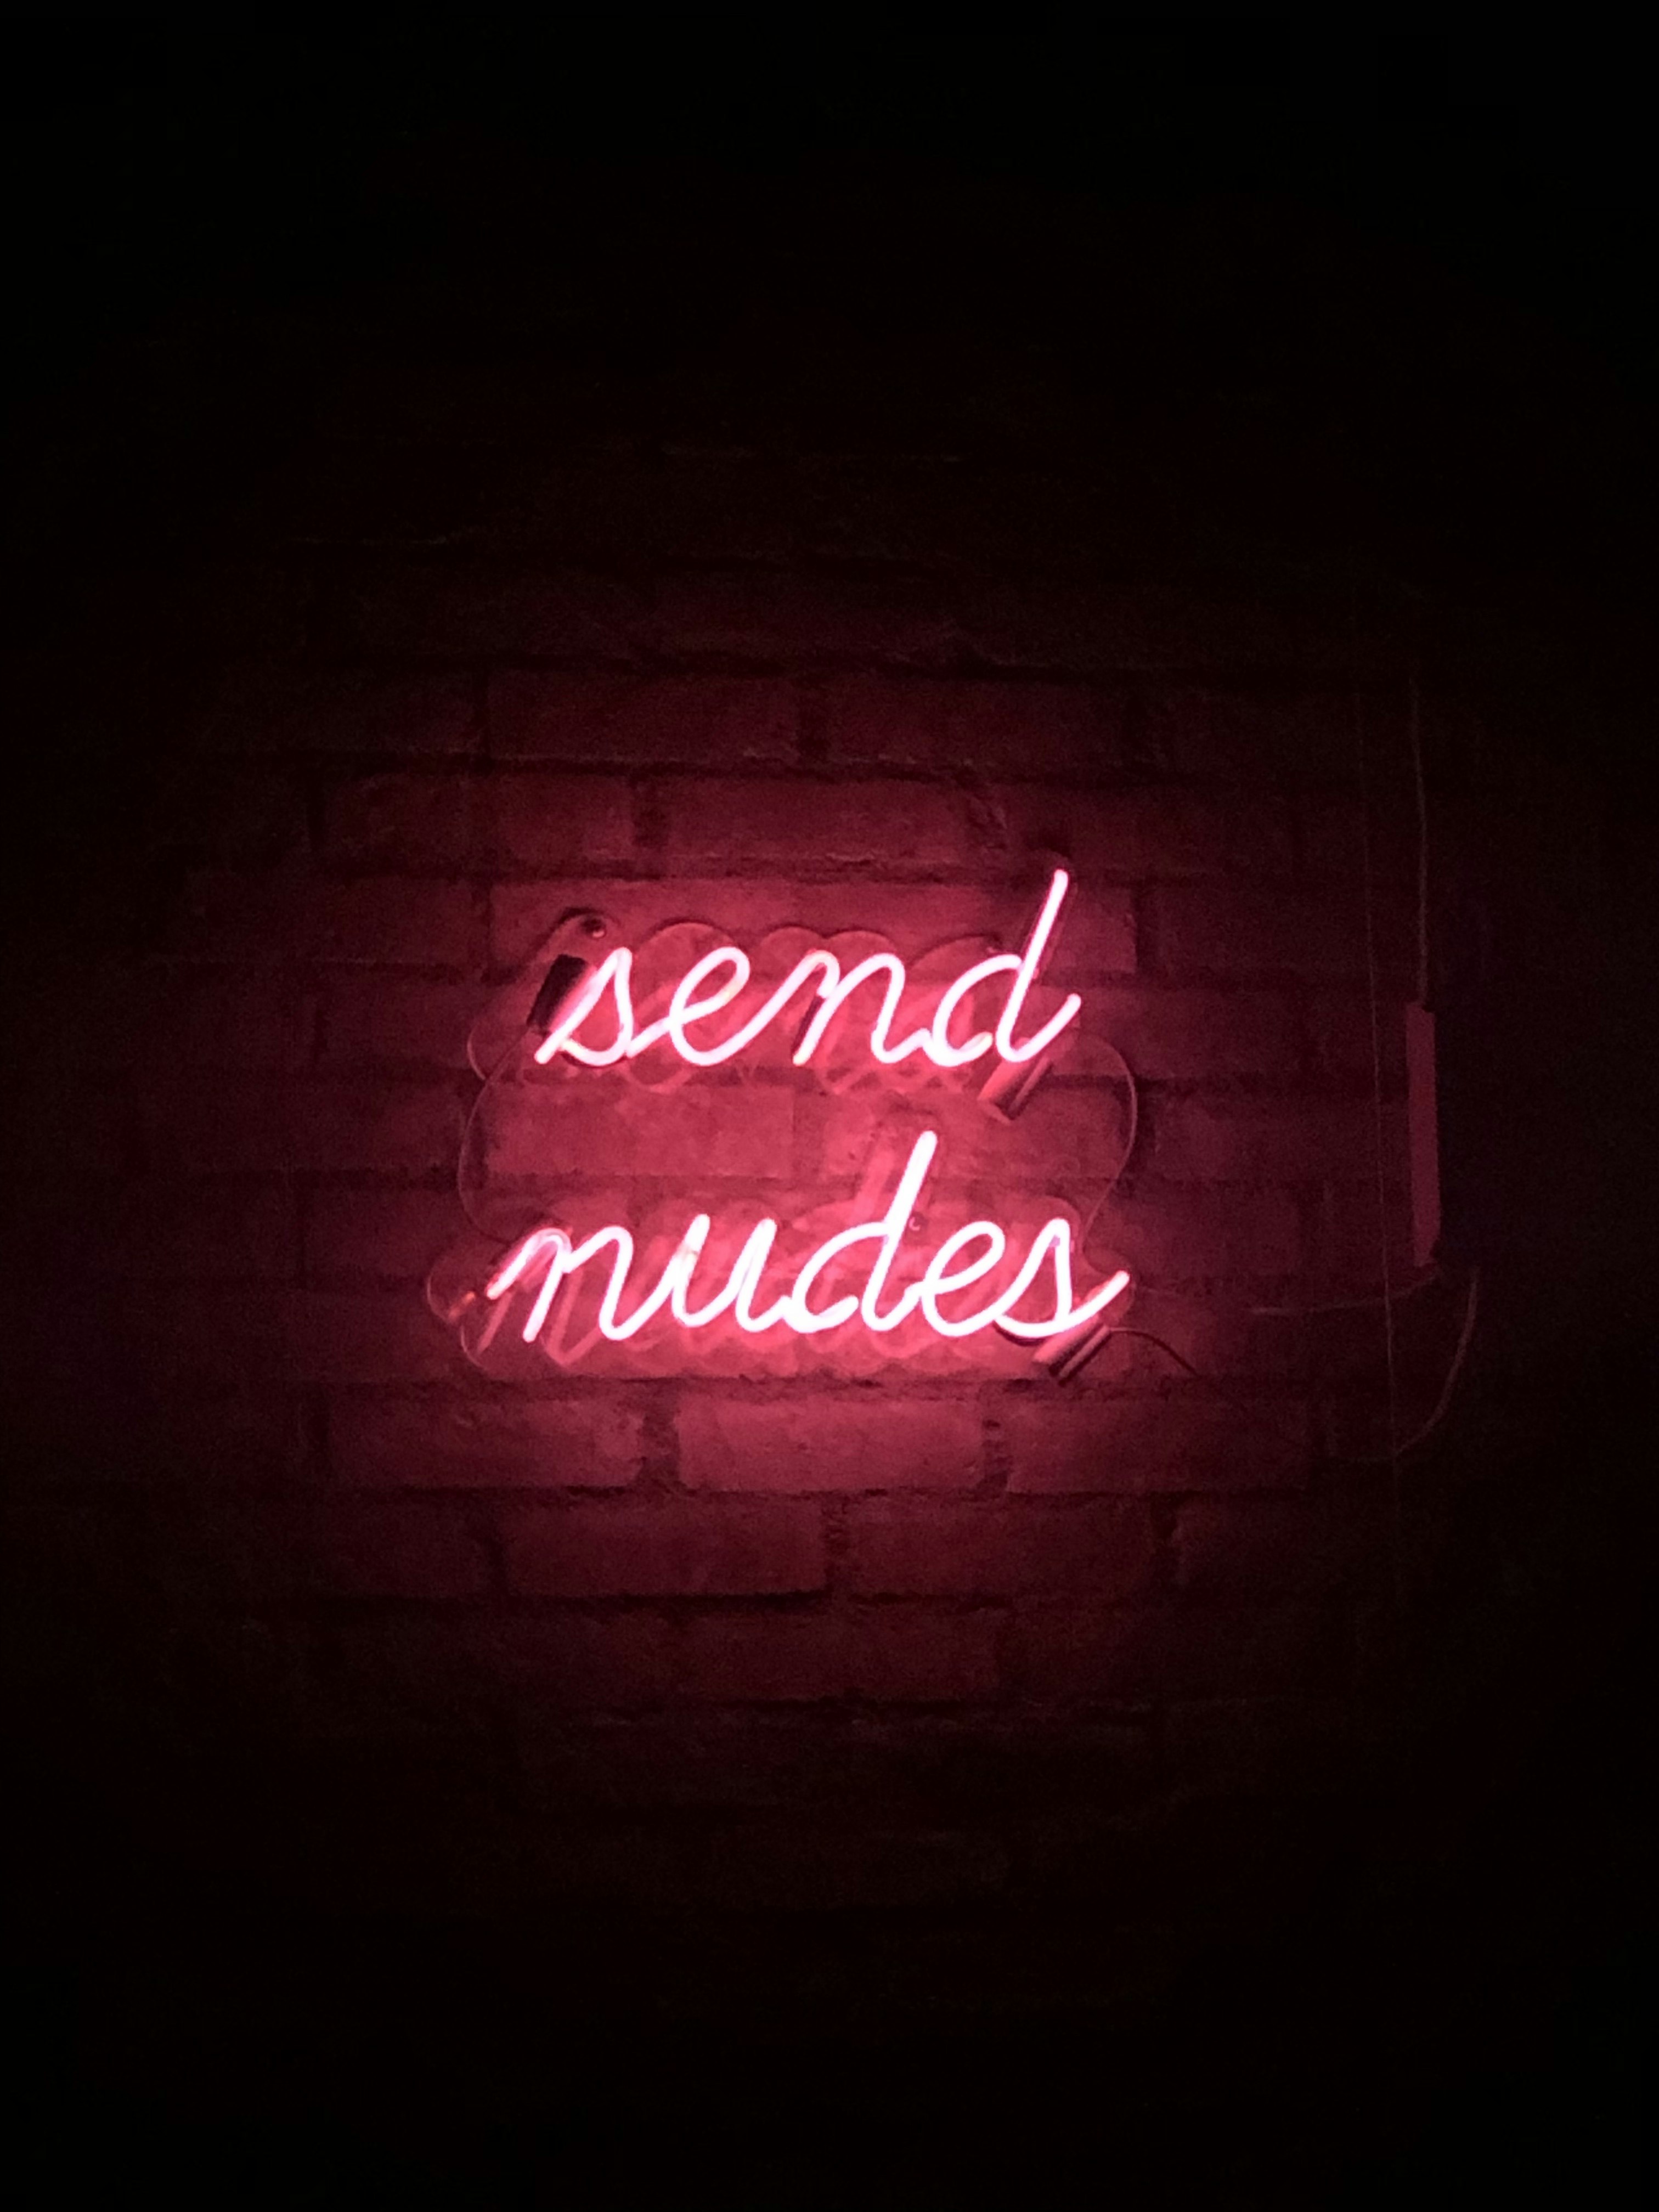 bryan kerster recommends send nudes wallpaper pic